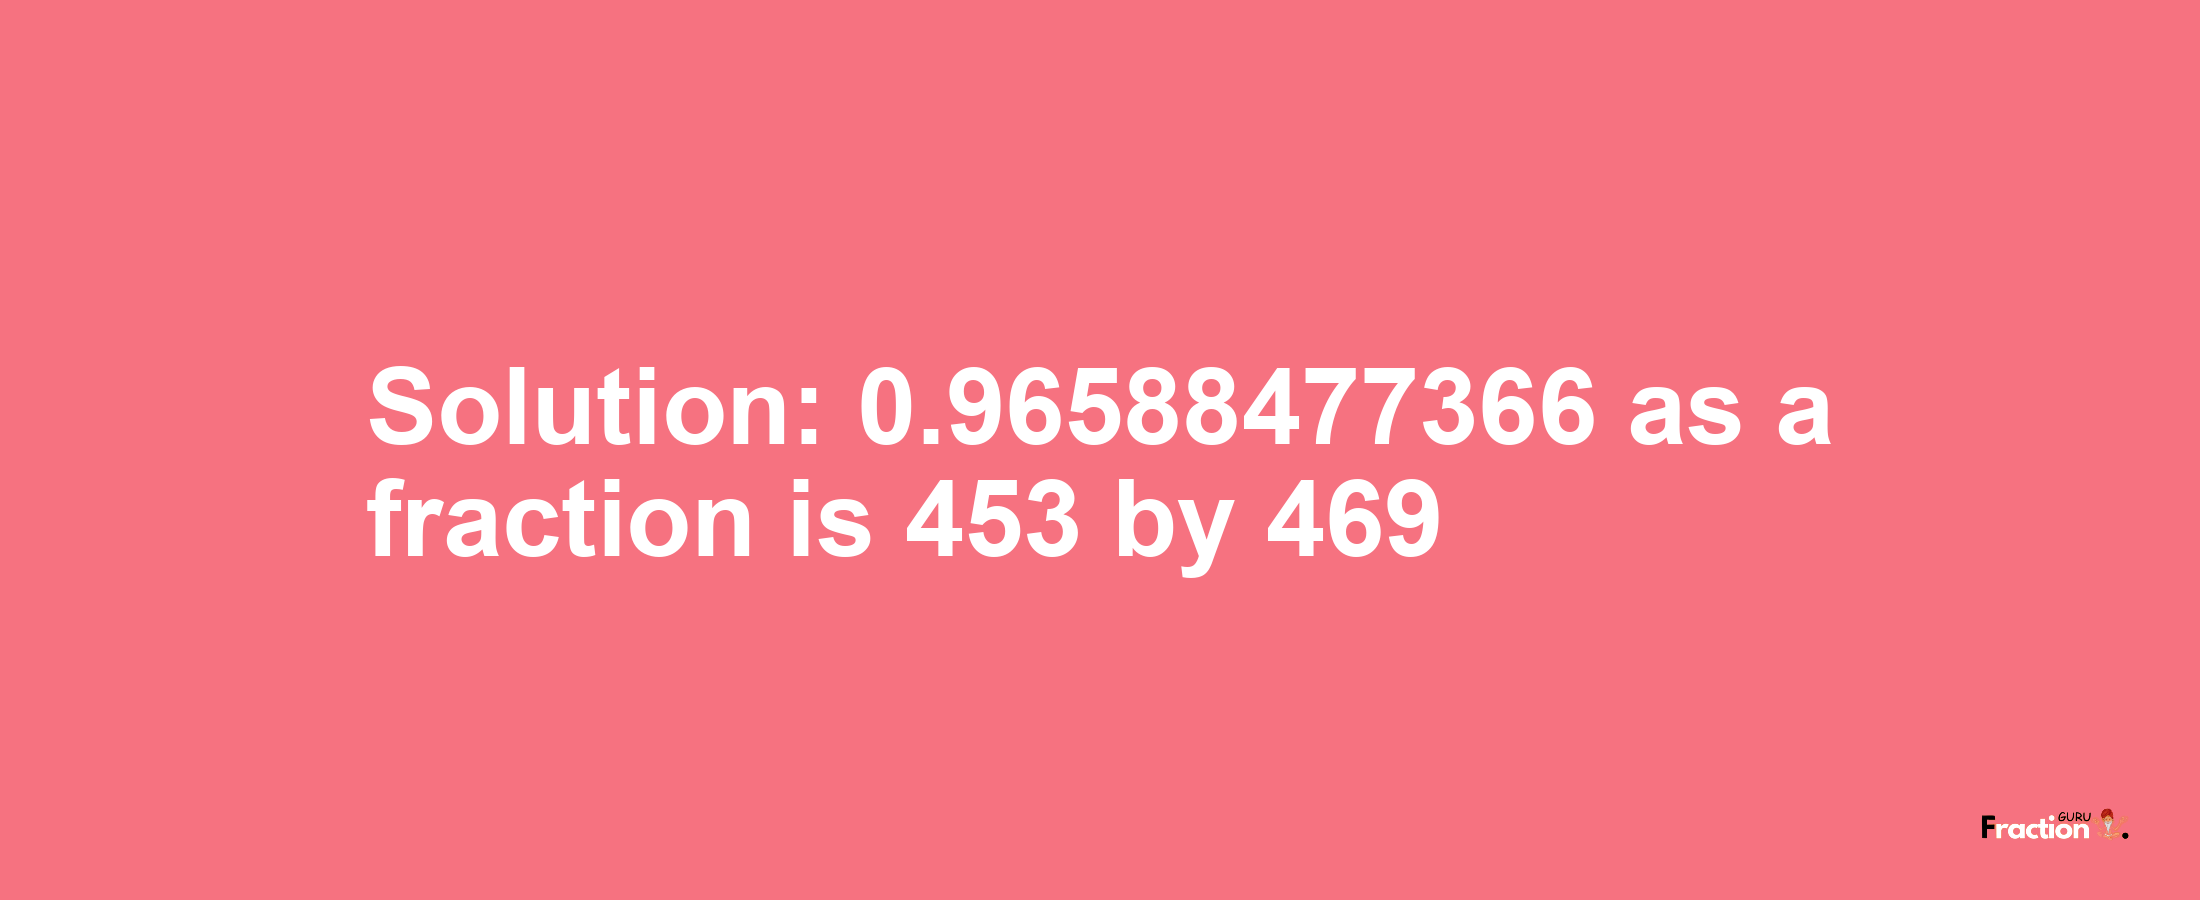 Solution:0.96588477366 as a fraction is 453/469